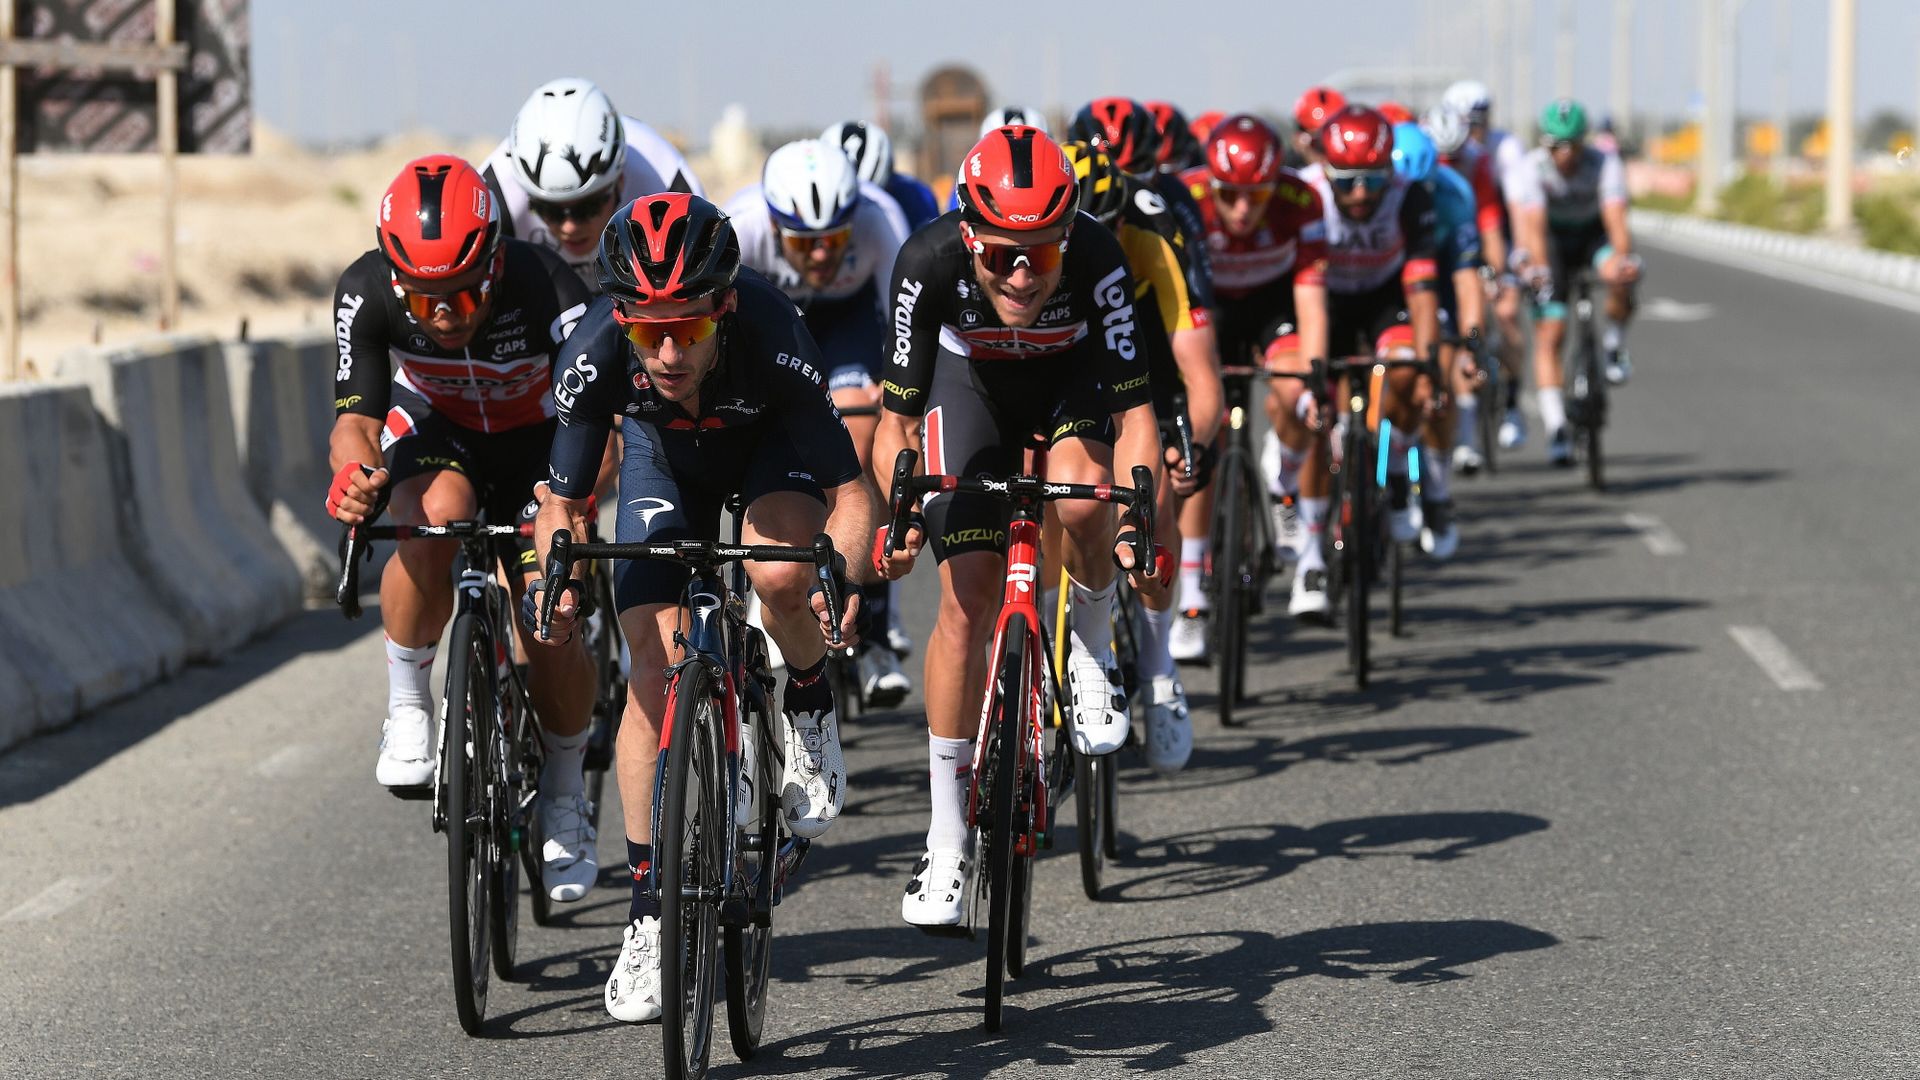 UAE Tour live stream 2022 how to watch UCI World Tour cycling online